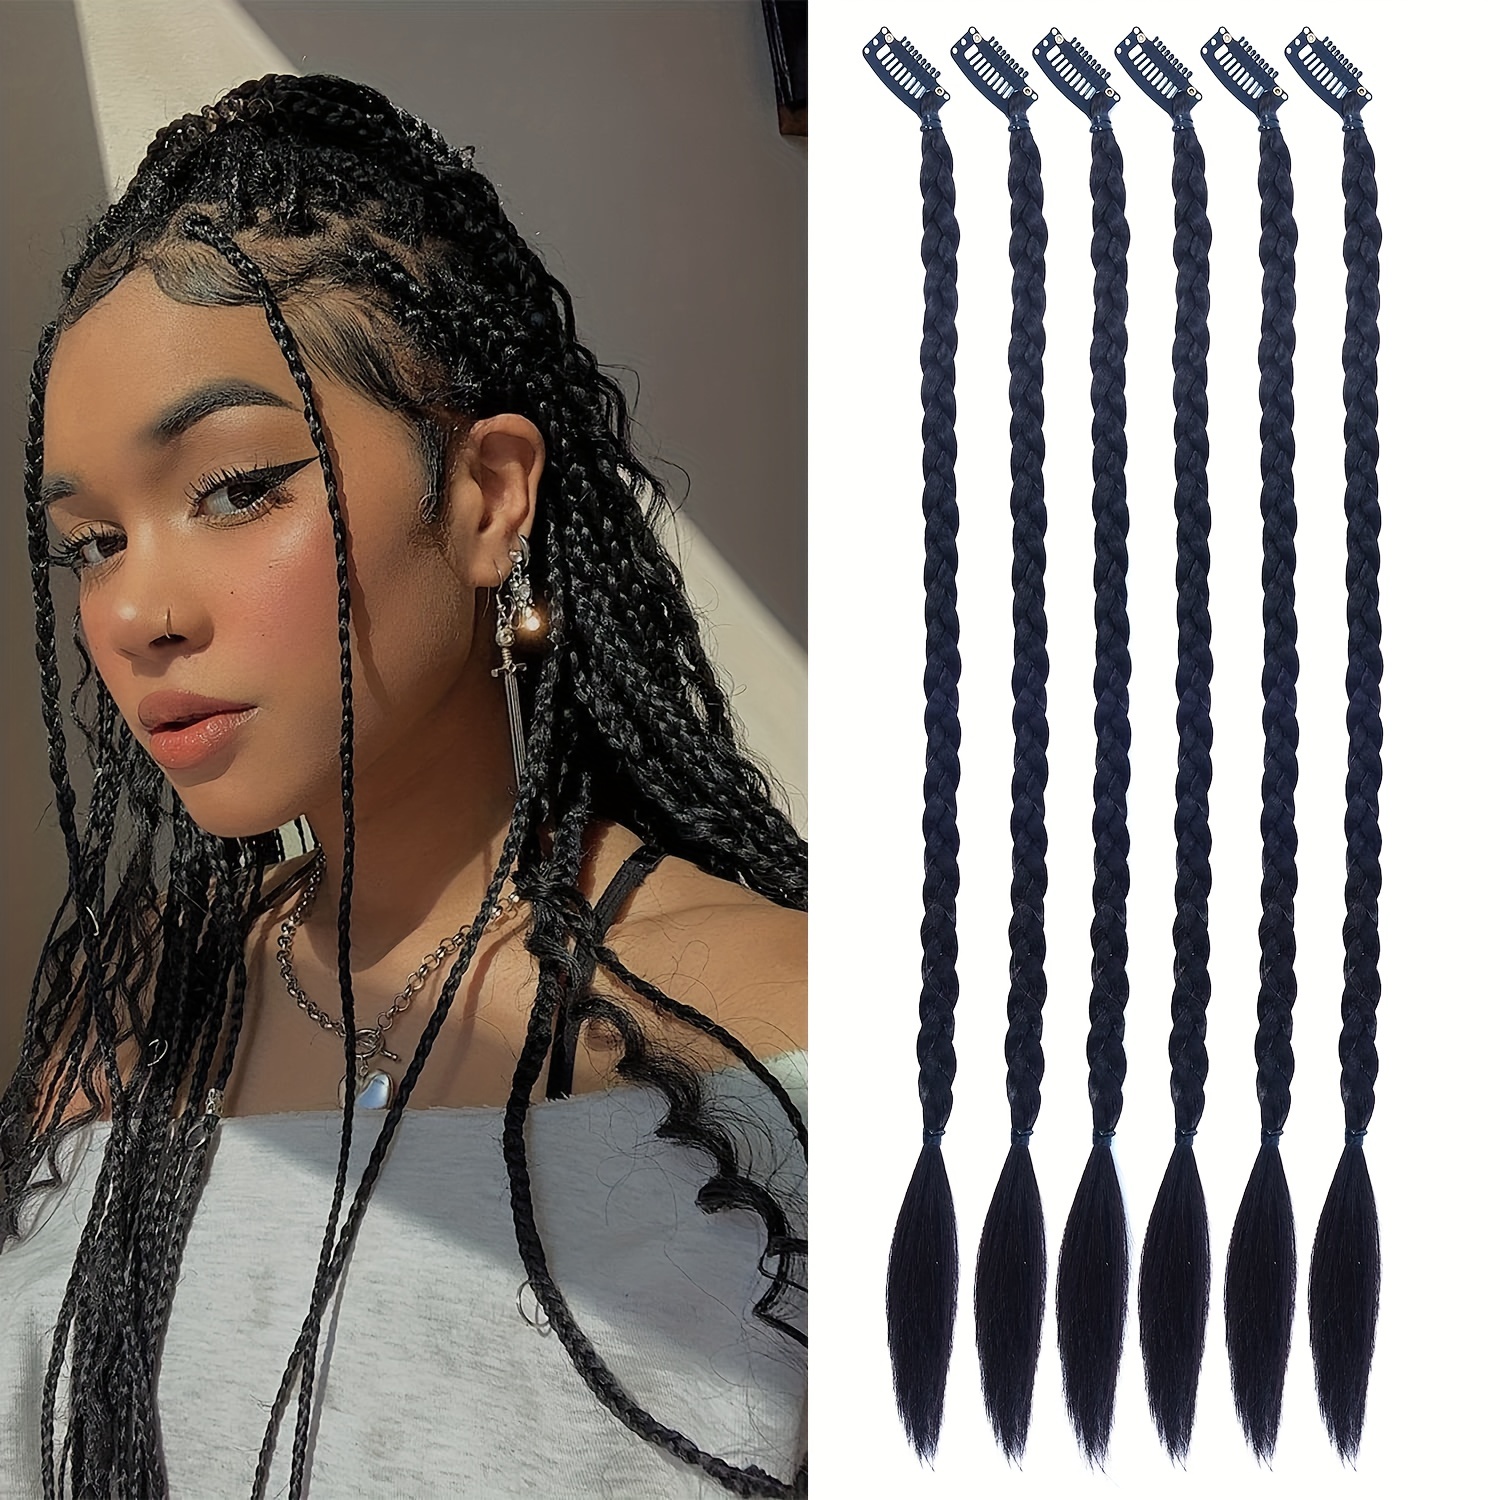  Braid Hair Extensions 6 Pcs Baby Braids Front Side Bang Long  Braided Ponytail Extension 18inch Clip in Hair Extensions Straight  Synthetic Hairpieces Natural Soft Synthetic Hair for Women Kids Girls